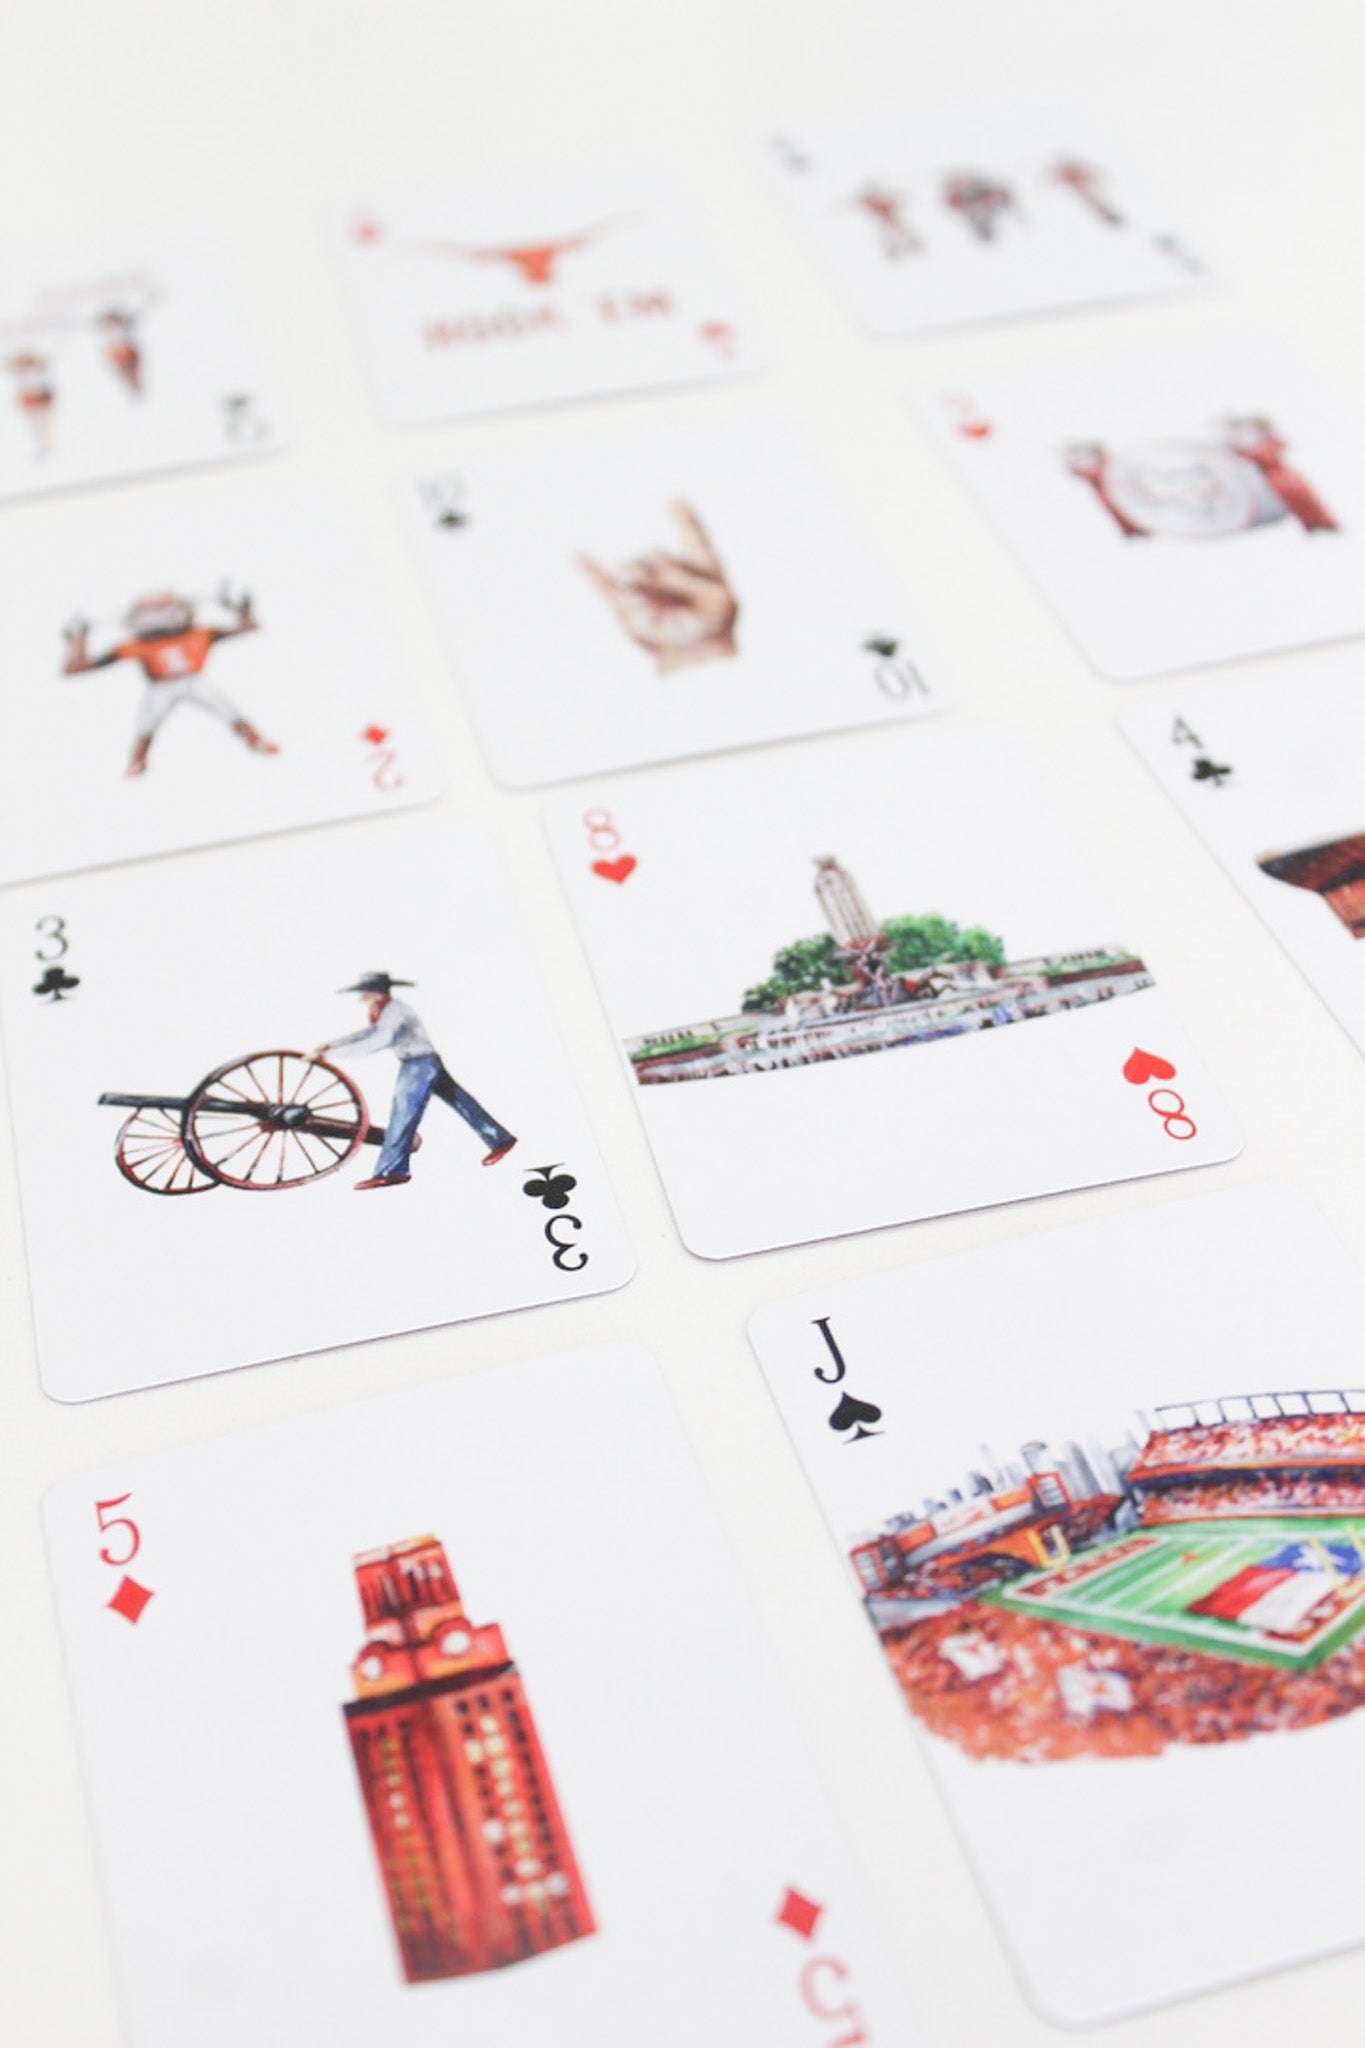 University of Texas at Austin playing cards